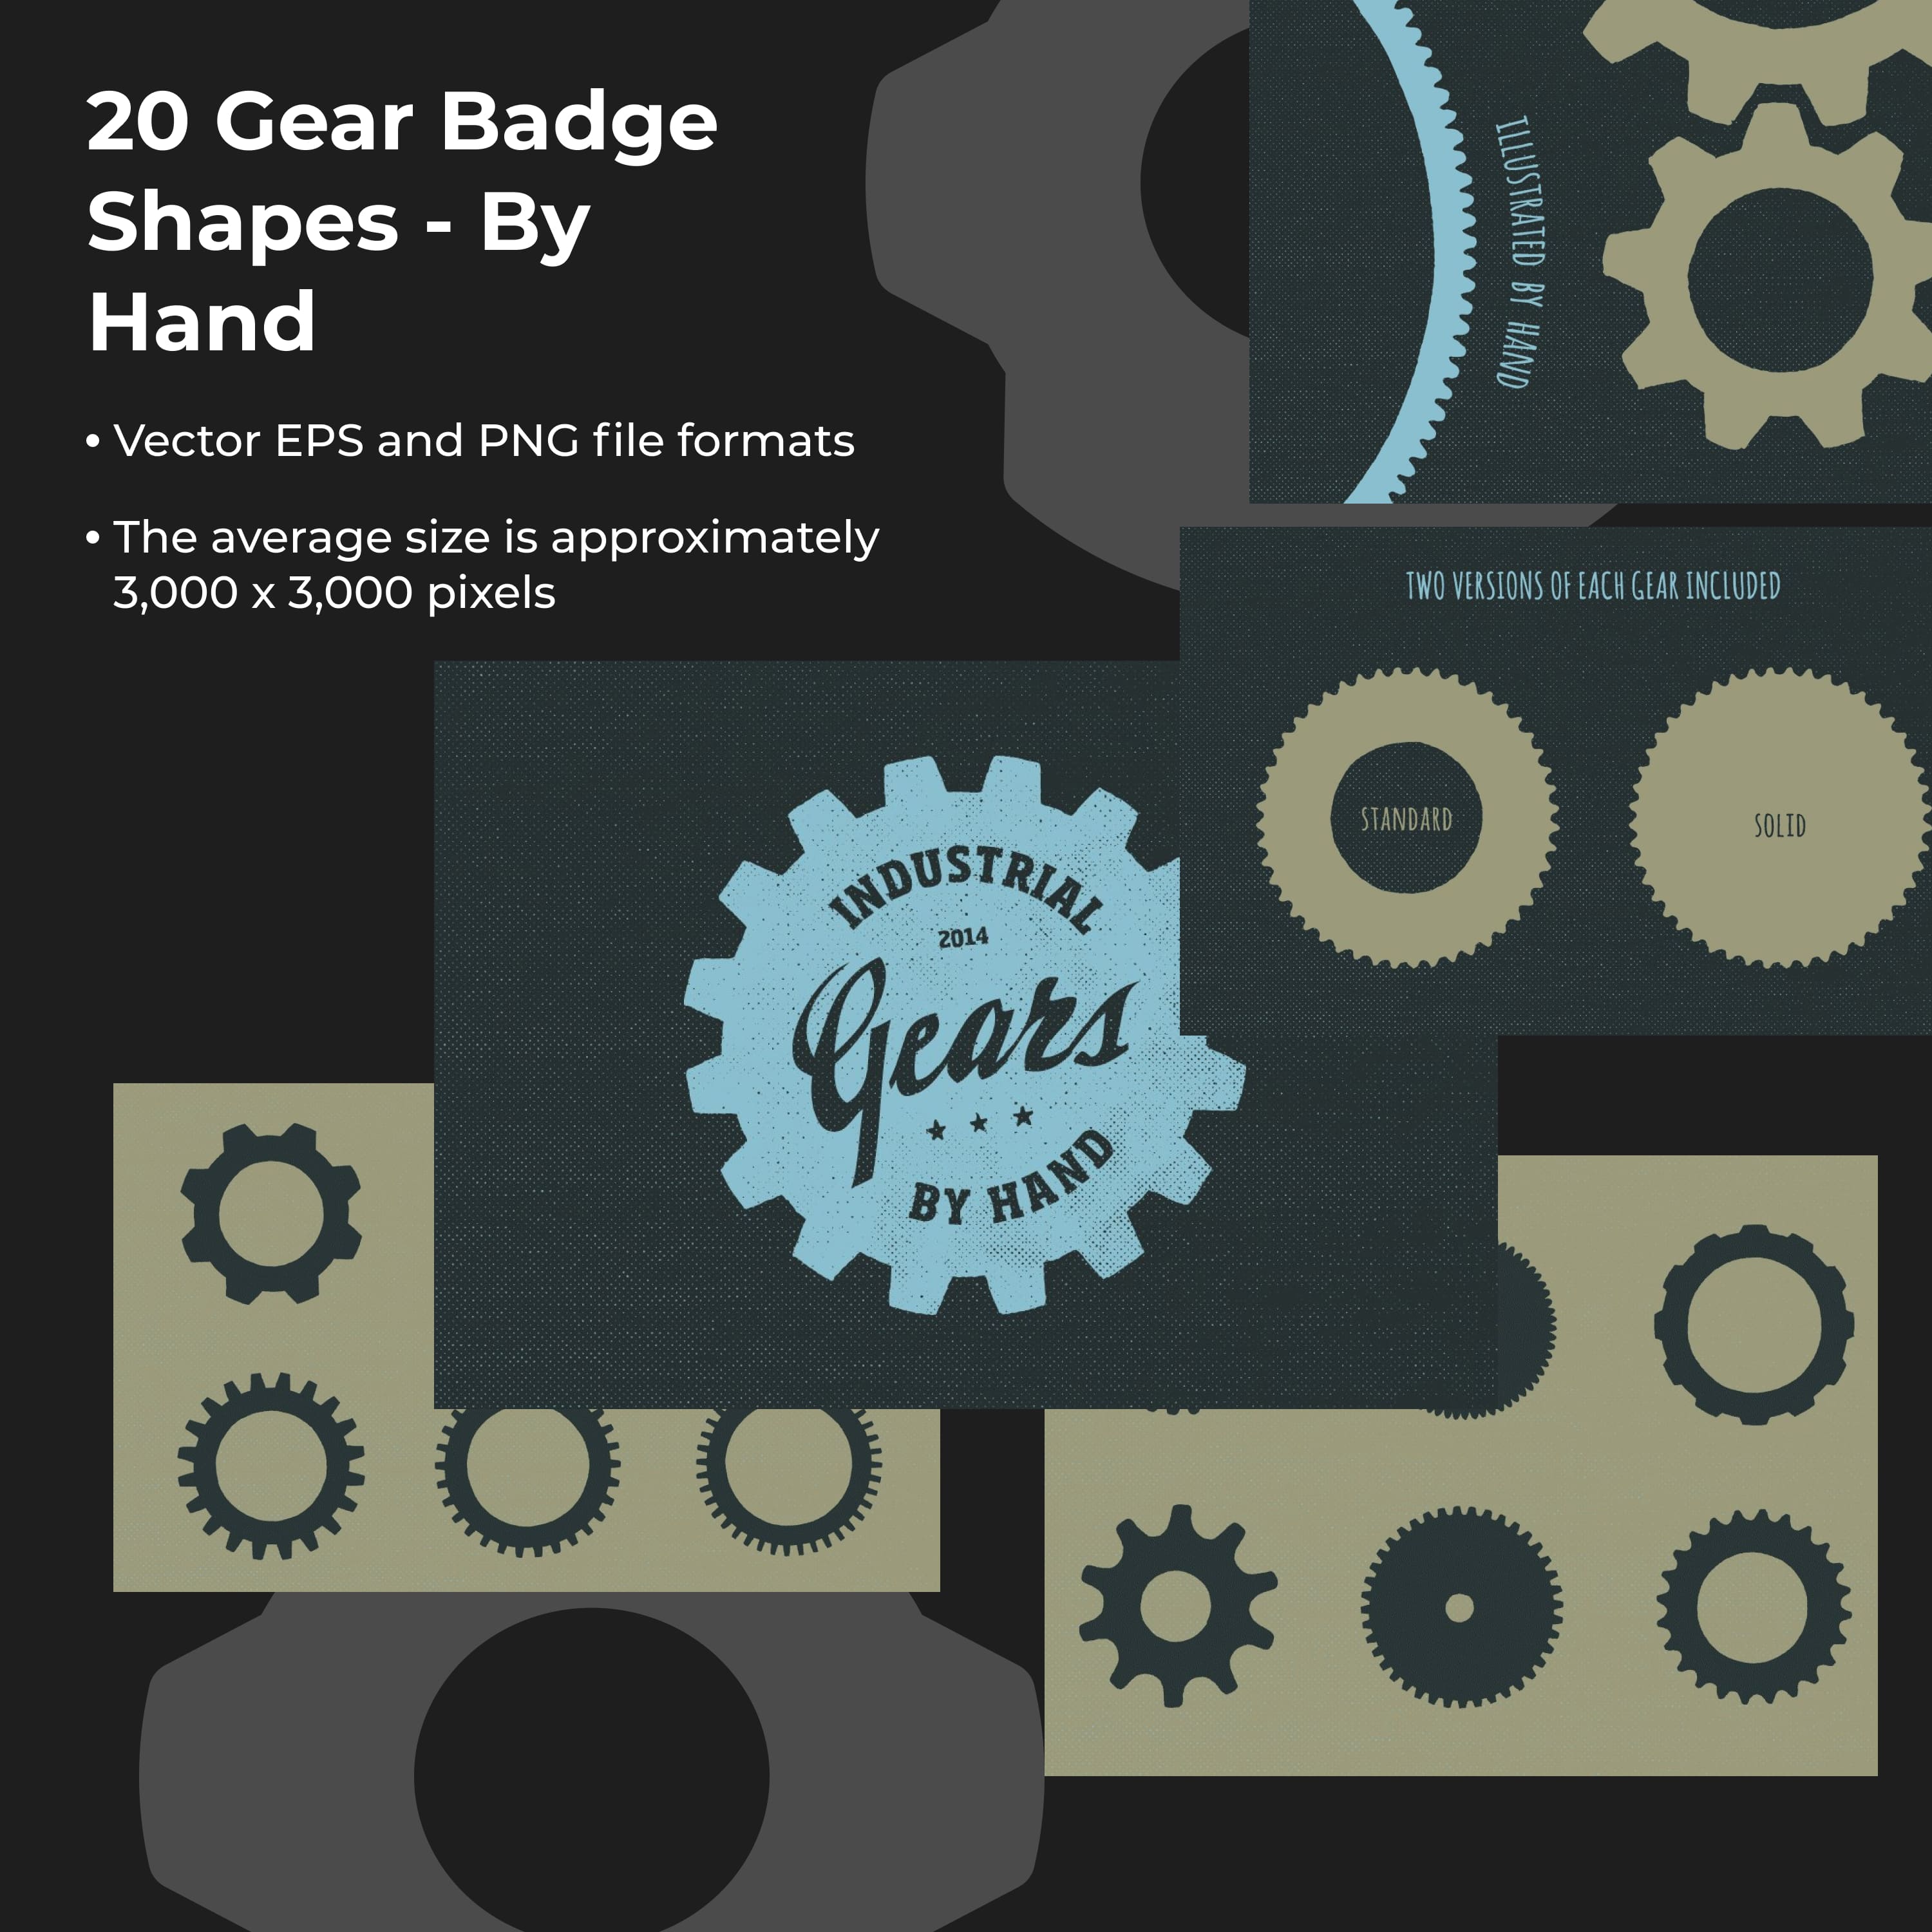 20 gear badge shapes by hand 1500x1500 2.